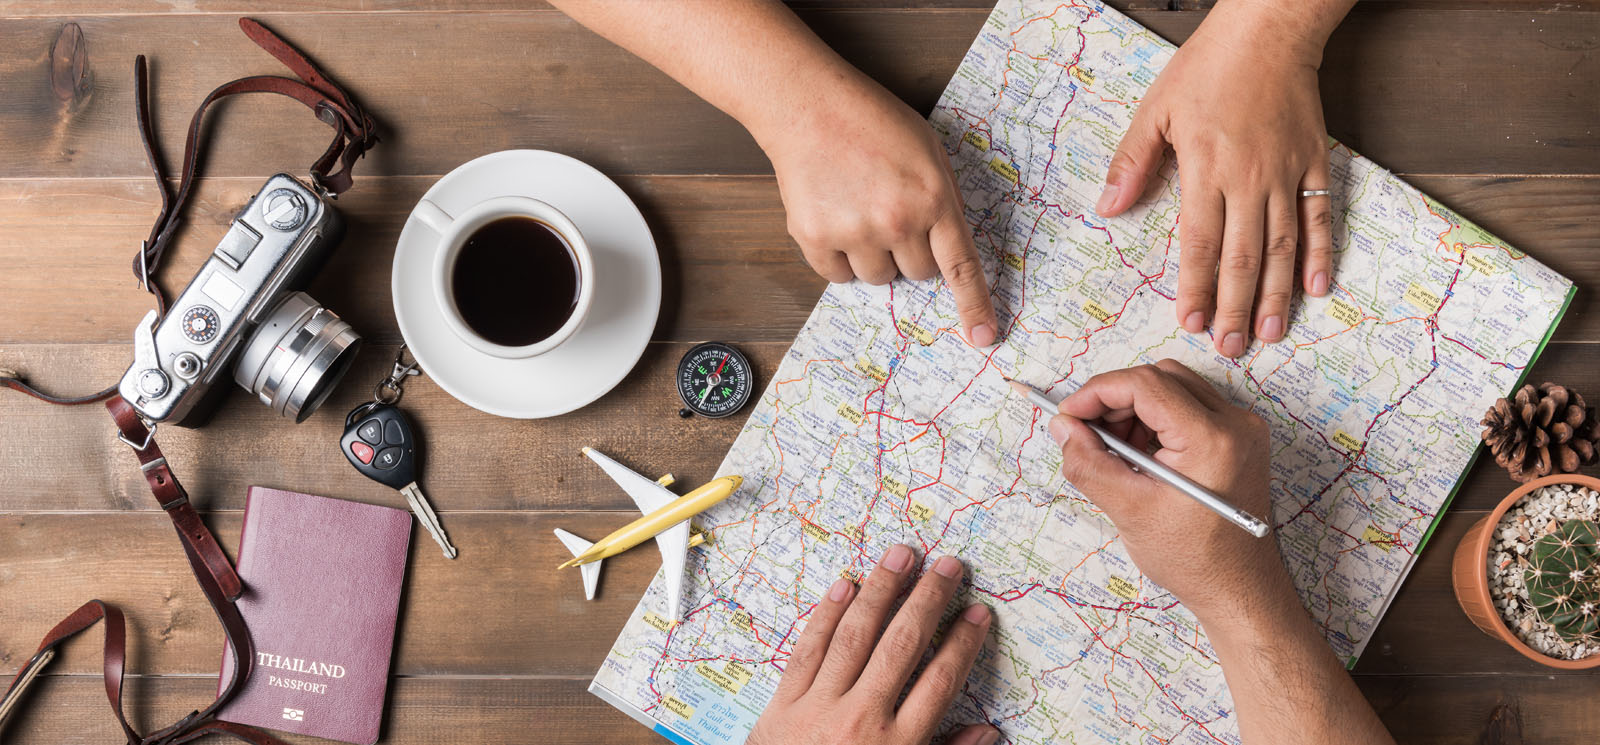 couple planning vacation trip with map